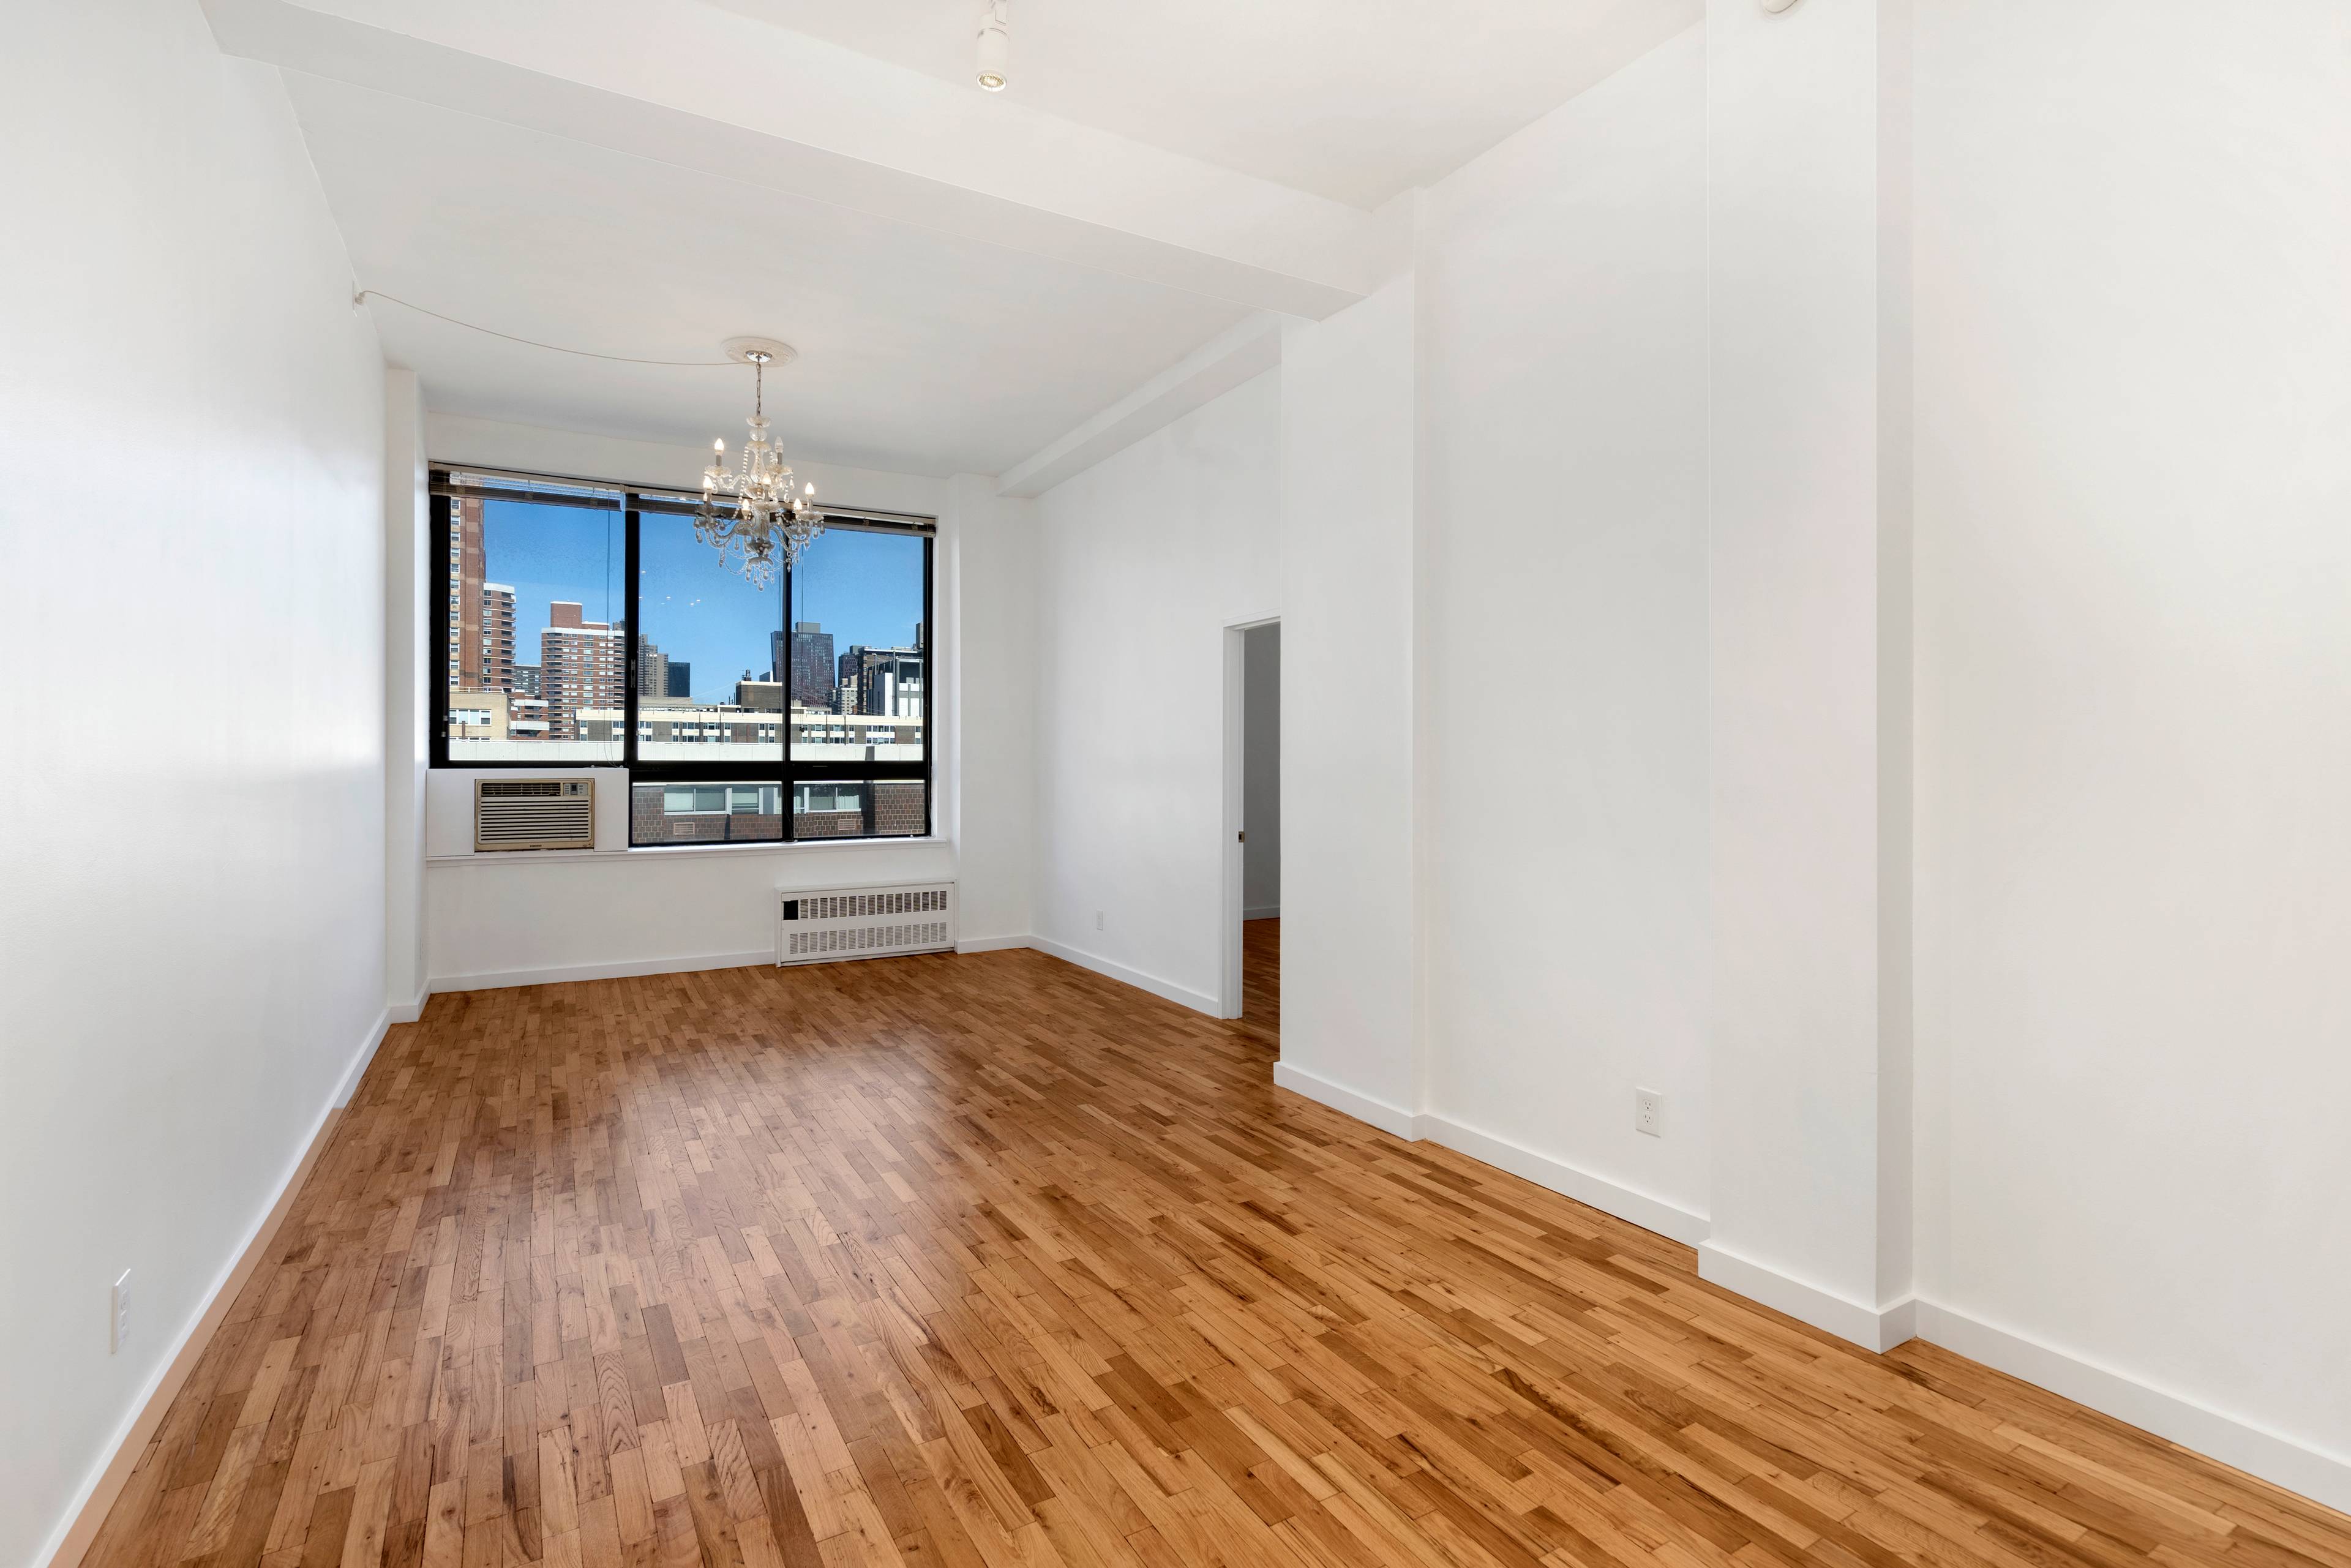 This Spectacular fully furnished Spacious Gramercy loft like space with 11 foot ceilings and 1000Sf is A Rare Find.